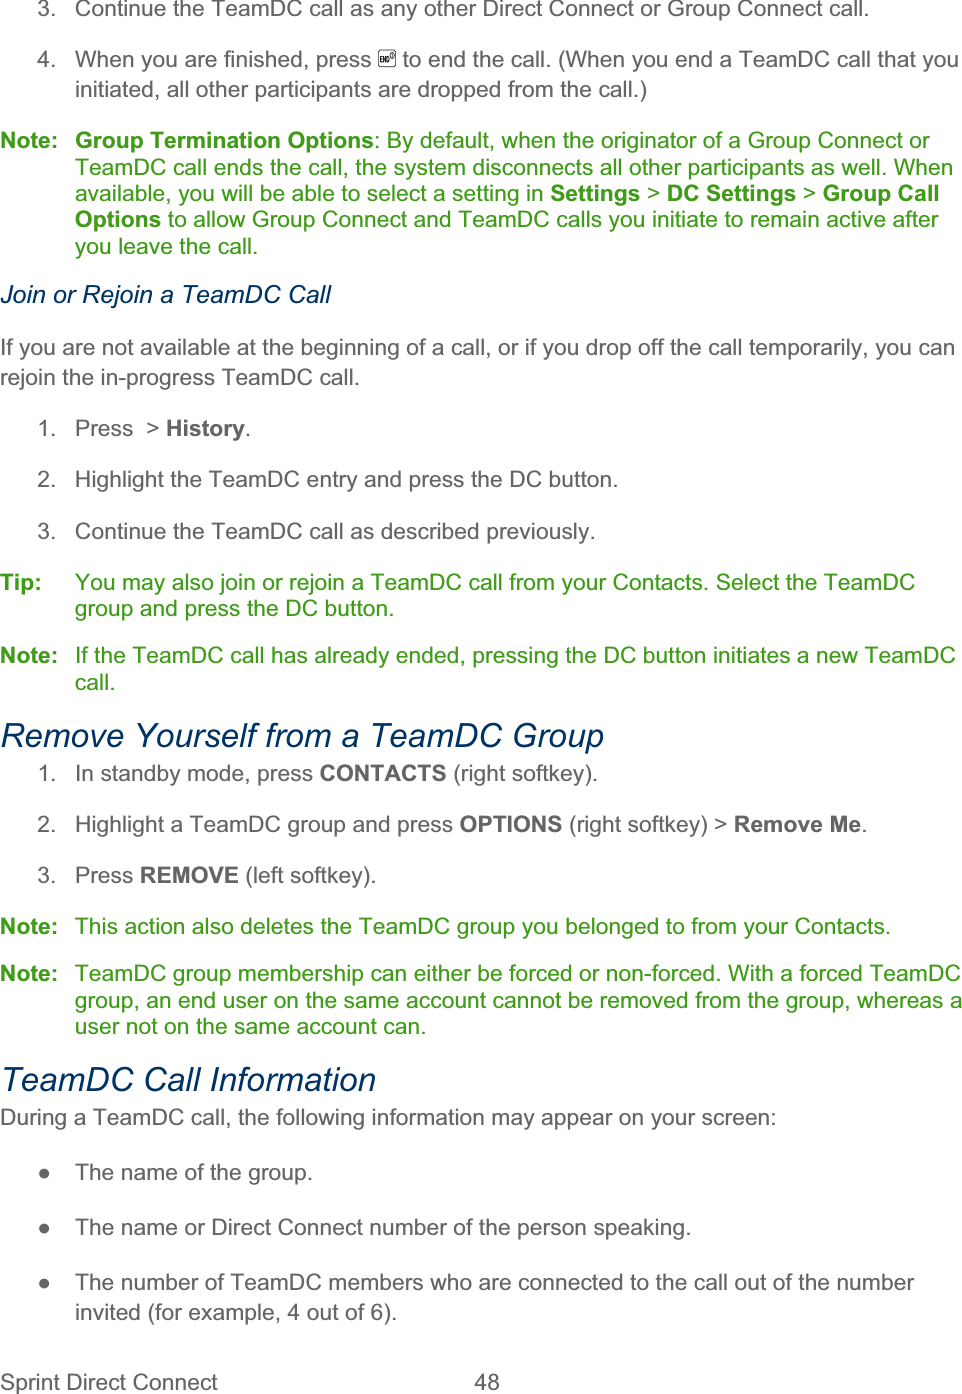 Sprint Direct Connect  48   3.  Continue the TeamDC call as any other Direct Connect or Group Connect call. 4.  When you are finished, press   to end the call. (When you end a TeamDC call that you initiated, all other participants are dropped from the call.) Note: Group Termination Options: By default, when the originator of a Group Connect or TeamDC call ends the call, the system disconnects all other participants as well. When available, you will be able to select a setting in Settings &gt; DC Settings &gt; Group Call Options to allow Group Connect and TeamDC calls you initiate to remain active after you leave the call. Join or Rejoin a TeamDC Call If you are not available at the beginning of a call, or if you drop off the call temporarily, you can rejoin the in-progress TeamDC call. 1.  Press  &gt; History.2.  Highlight the TeamDC entry and press the DC button. 3.  Continue the TeamDC call as described previously. Tip:   You may also join or rejoin a TeamDC call from your Contacts. Select the TeamDC group and press the DC button. Note:  If the TeamDC call has already ended, pressing the DC button initiates a new TeamDC call.Remove Yourself from a TeamDC Group 1.  In standby mode, press CONTACTS (right softkey). 2.  Highlight a TeamDC group and press OPTIONS (right softkey) &gt; Remove Me.3. Press REMOVE (left softkey). Note:  This action also deletes the TeamDC group you belonged to from your Contacts. Note:  TeamDC group membership can either be forced or non-forced. With a forced TeamDC group, an end user on the same account cannot be removed from the group, whereas a user not on the same account can. TeamDC Call Information During a TeamDC call, the following information may appear on your screen: ŏ  The name of the group. ŏ  The name or Direct Connect number of the person speaking. ŏ  The number of TeamDC members who are connected to the call out of the number invited (for example, 4 out of 6). 